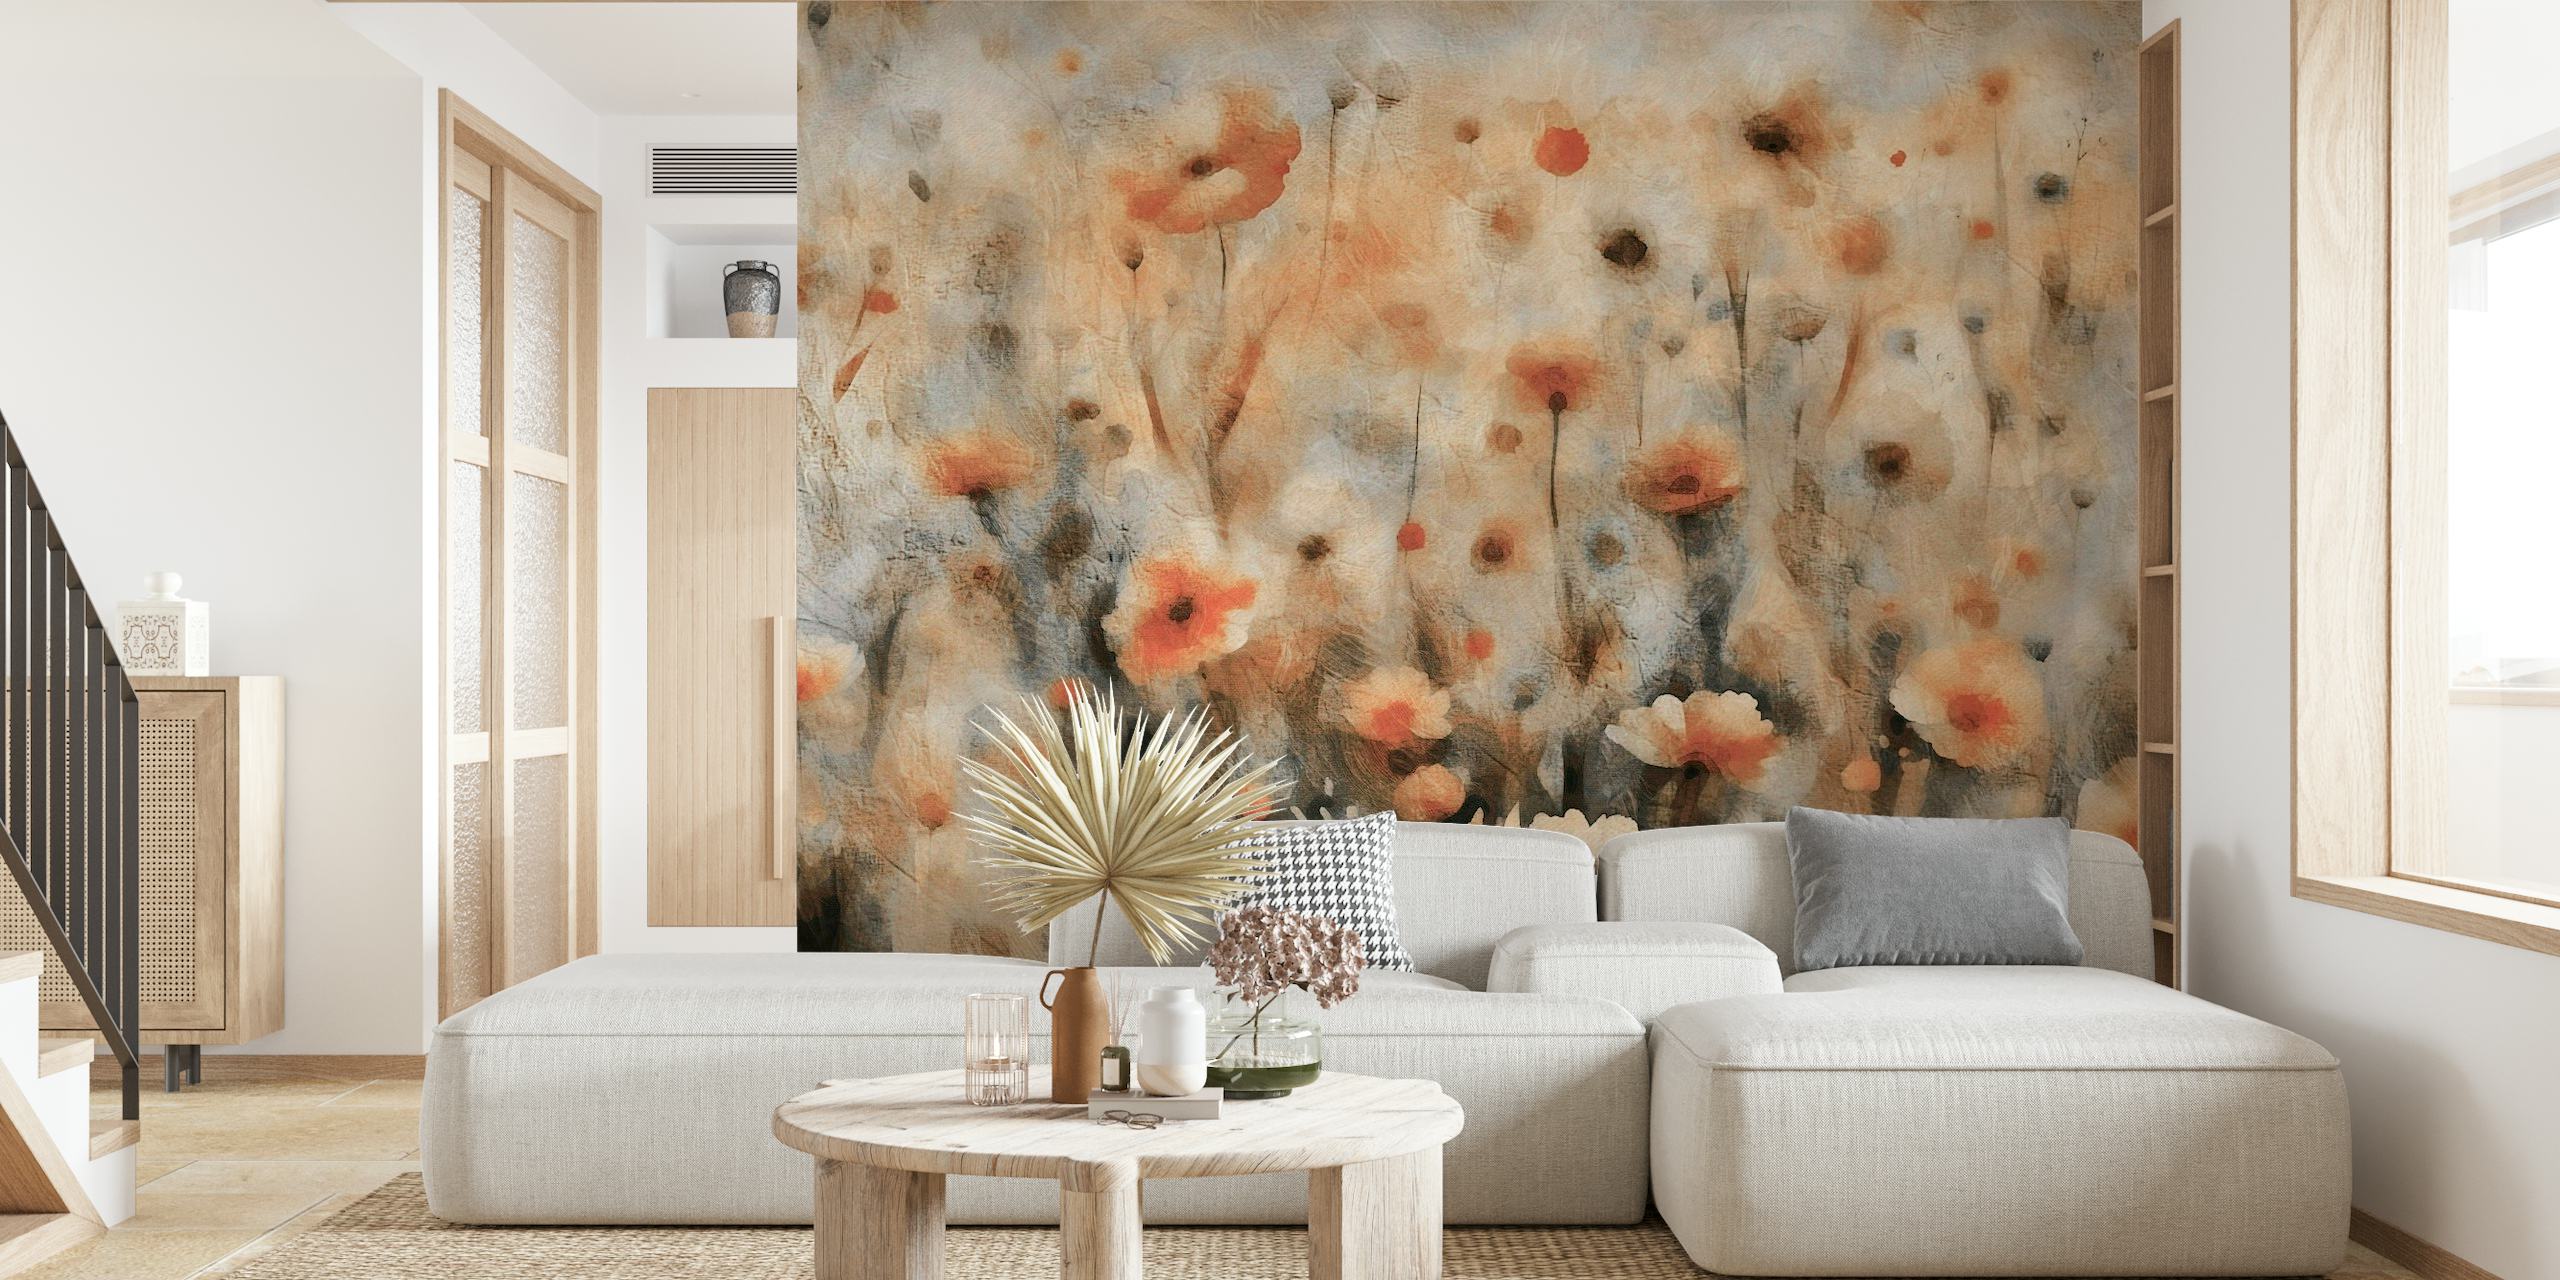 Antique-style wall mural with moody wildflowers in faded earthy tones